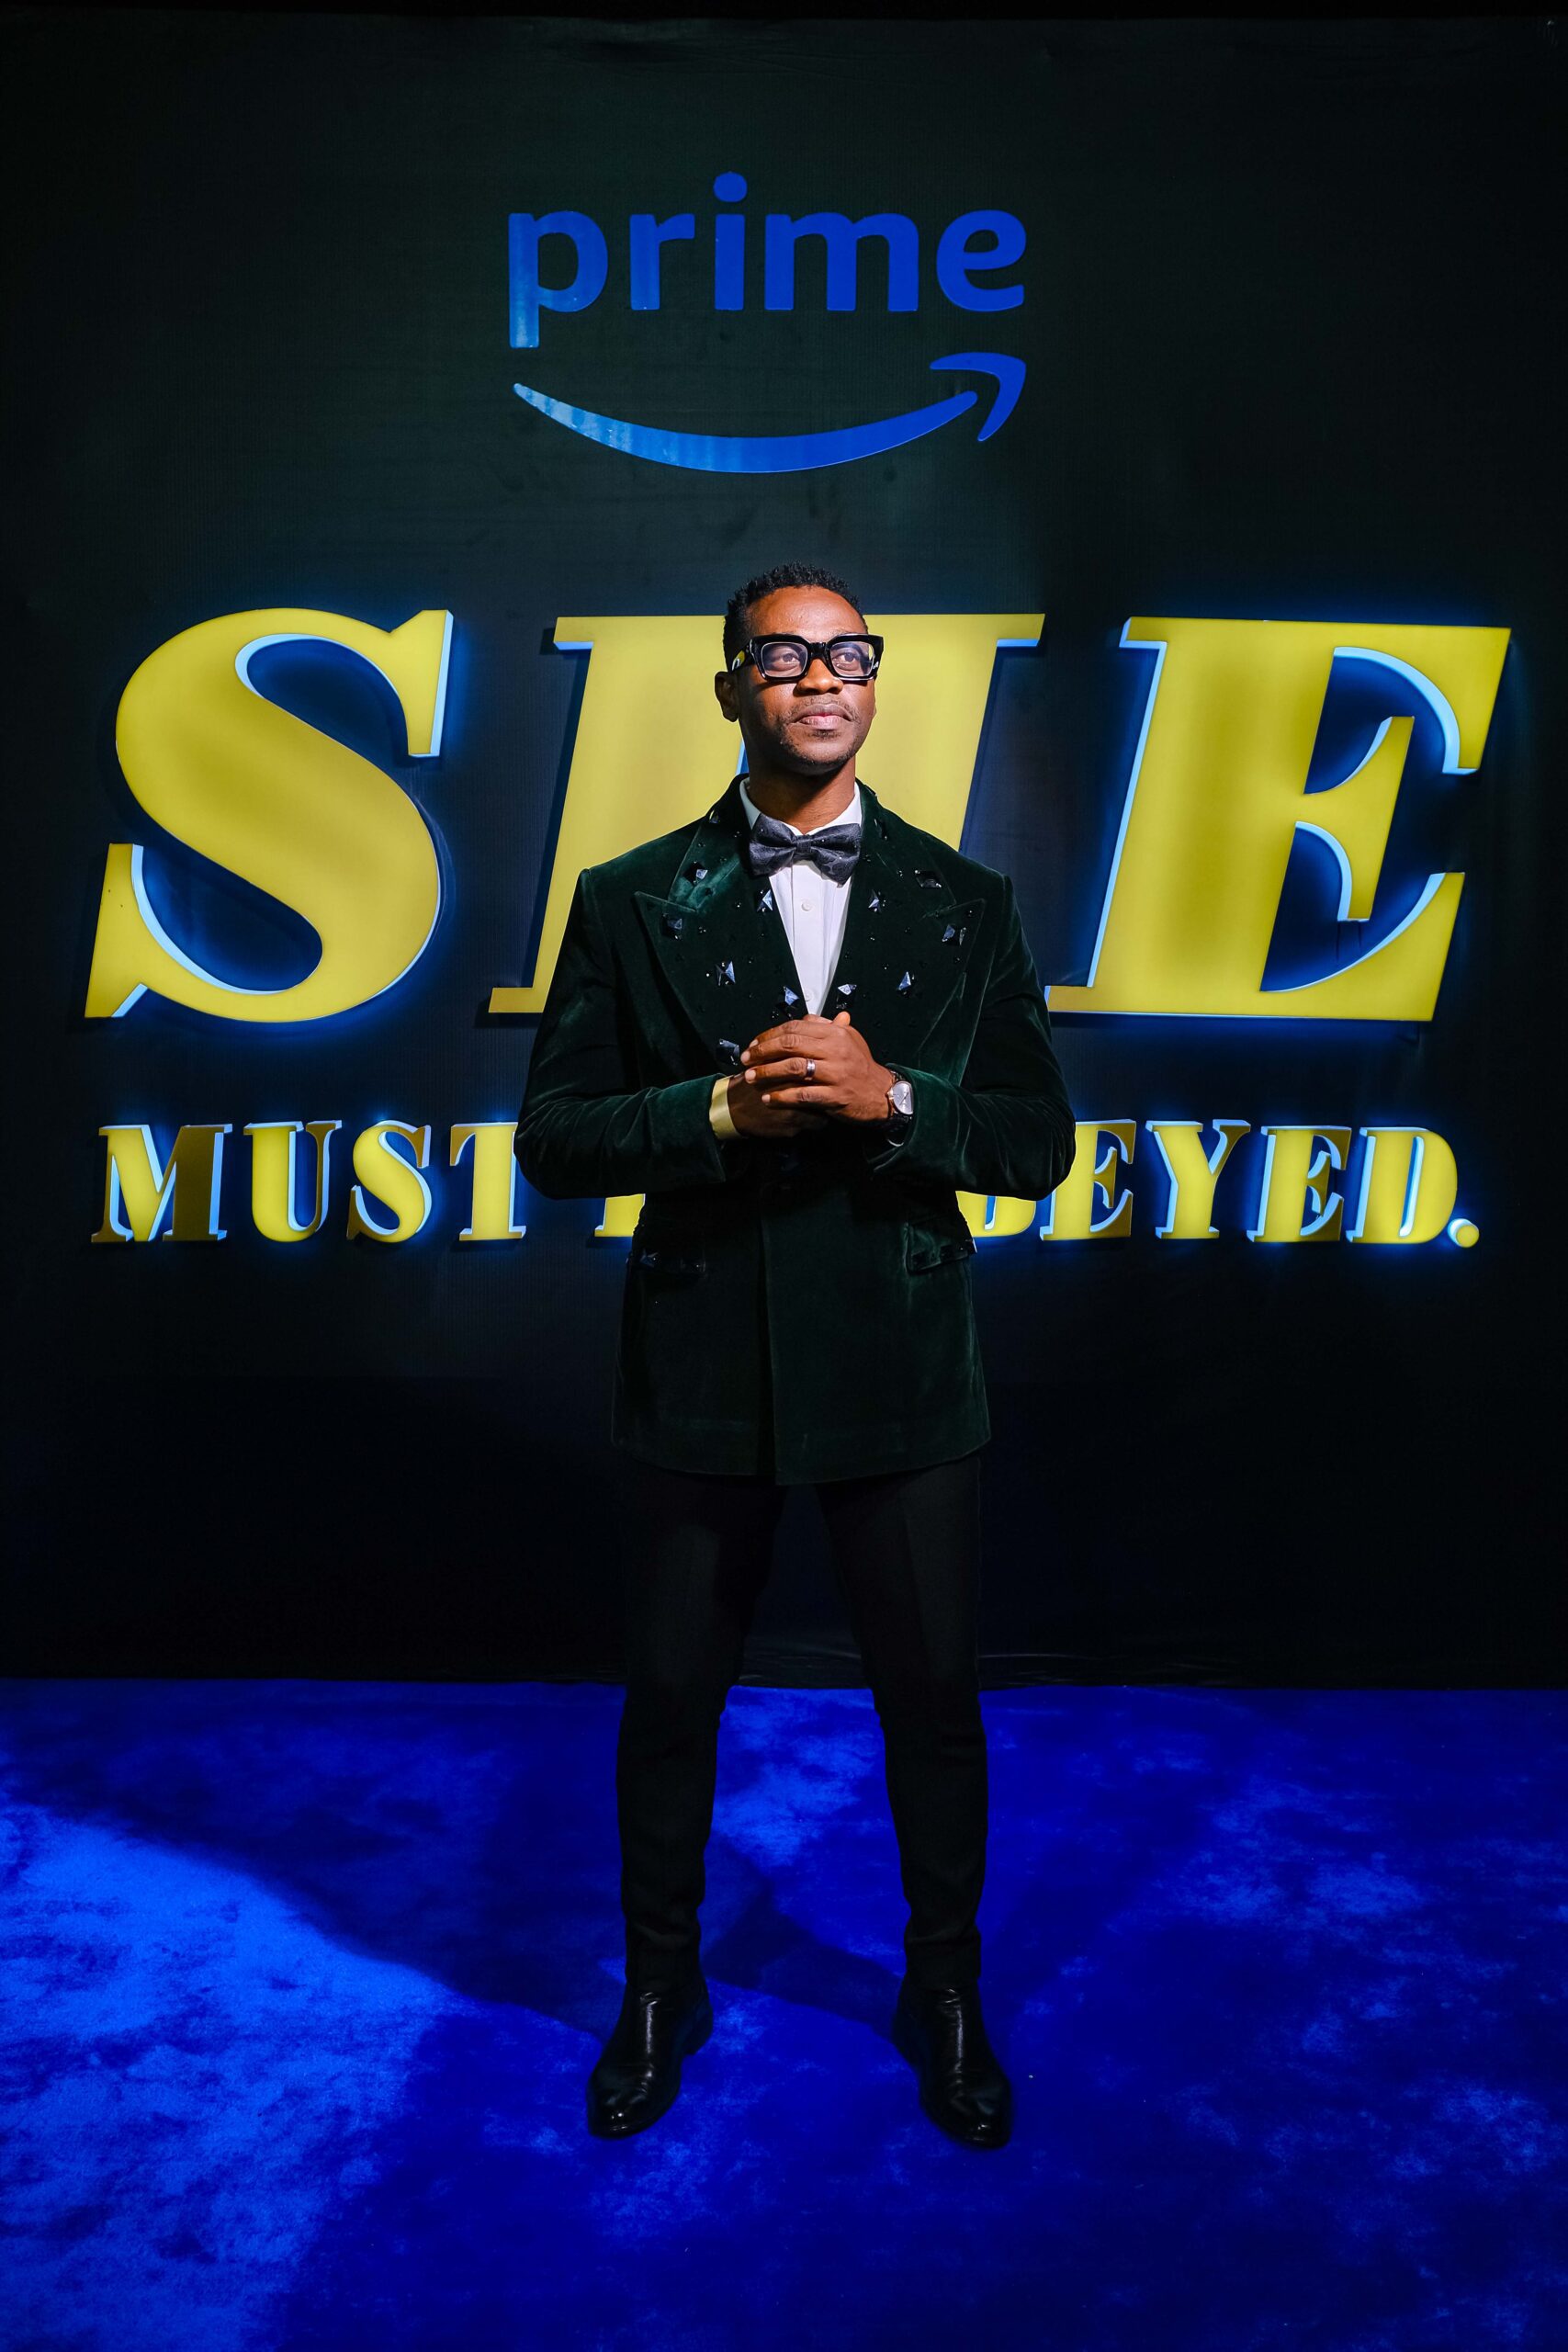 BIGV9780 1 scaled - Prime Video Launches “She Must Be Obeyed” Series, Its 3rd Nigerian Original Title With Grandeur and Style!